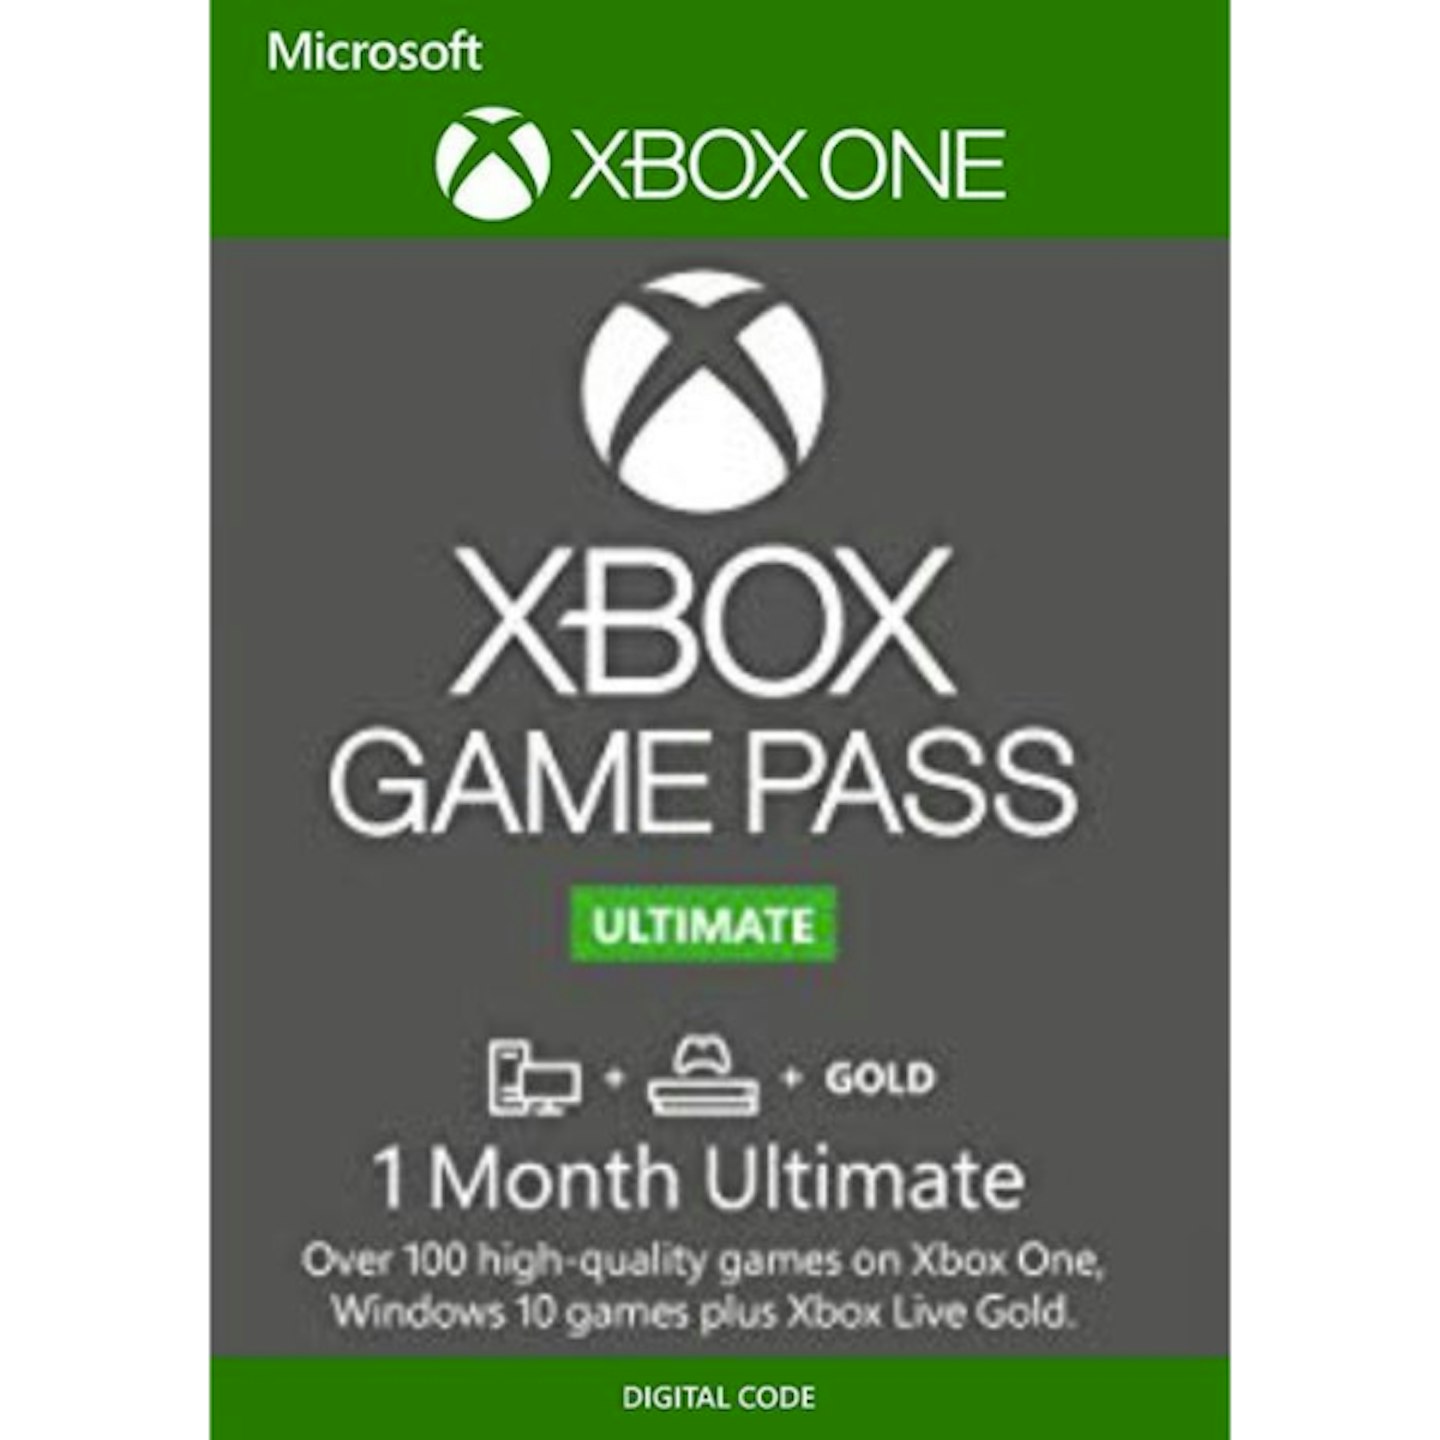 Xbox Game Pass - One Month